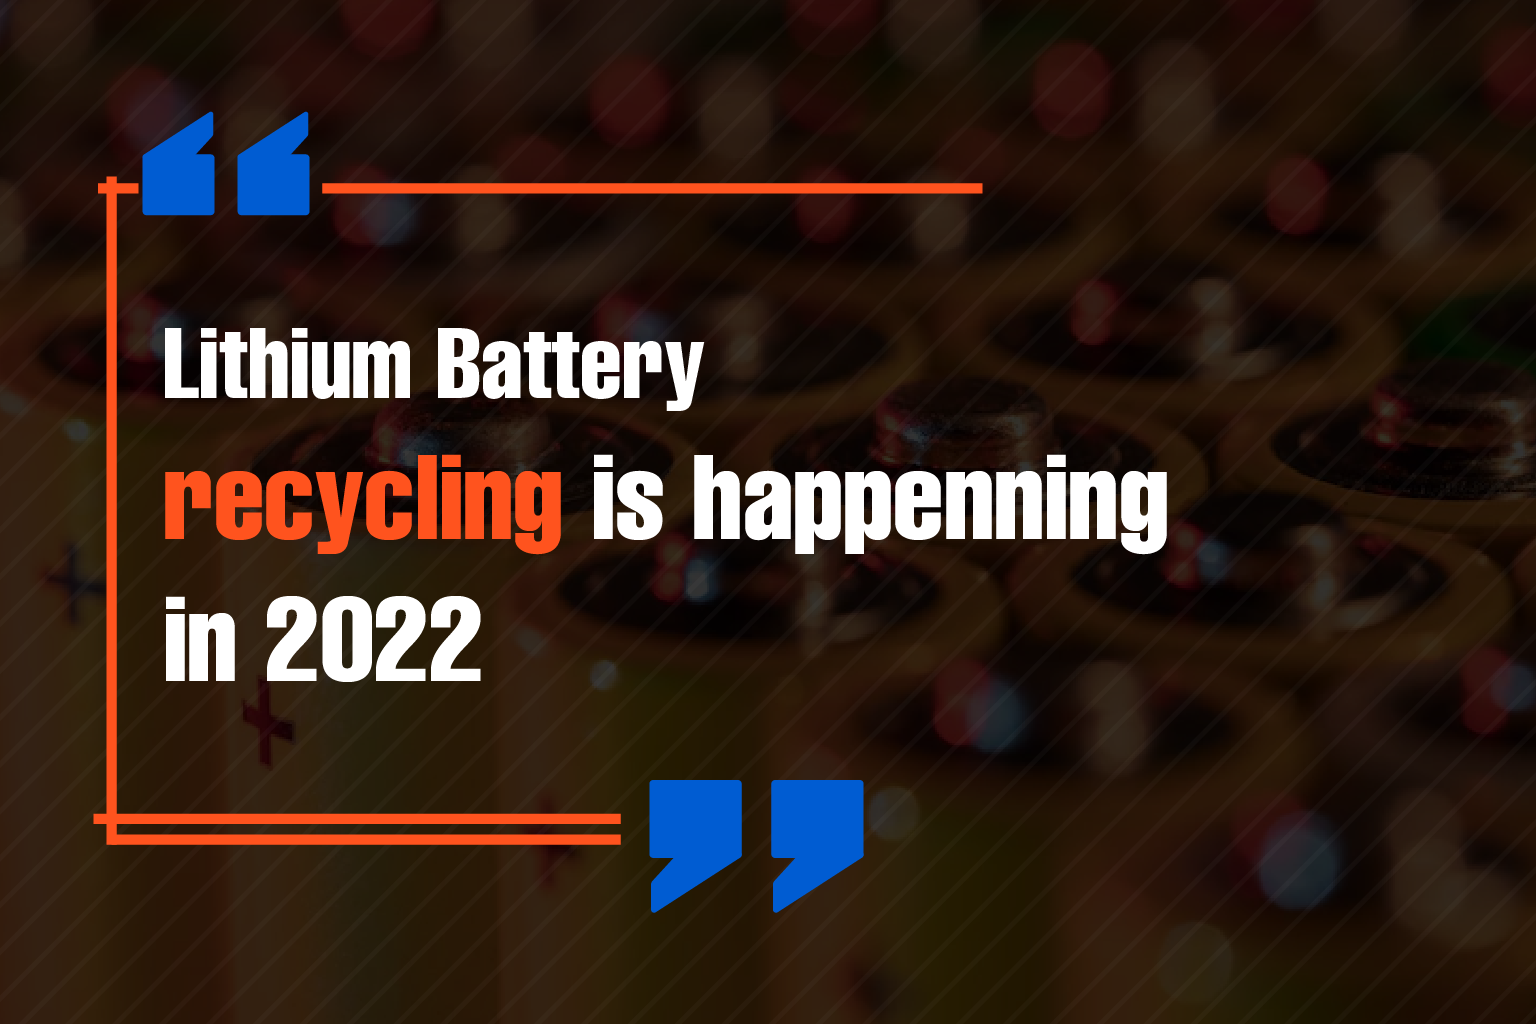 Lithium Battery recycling is happening in 2022